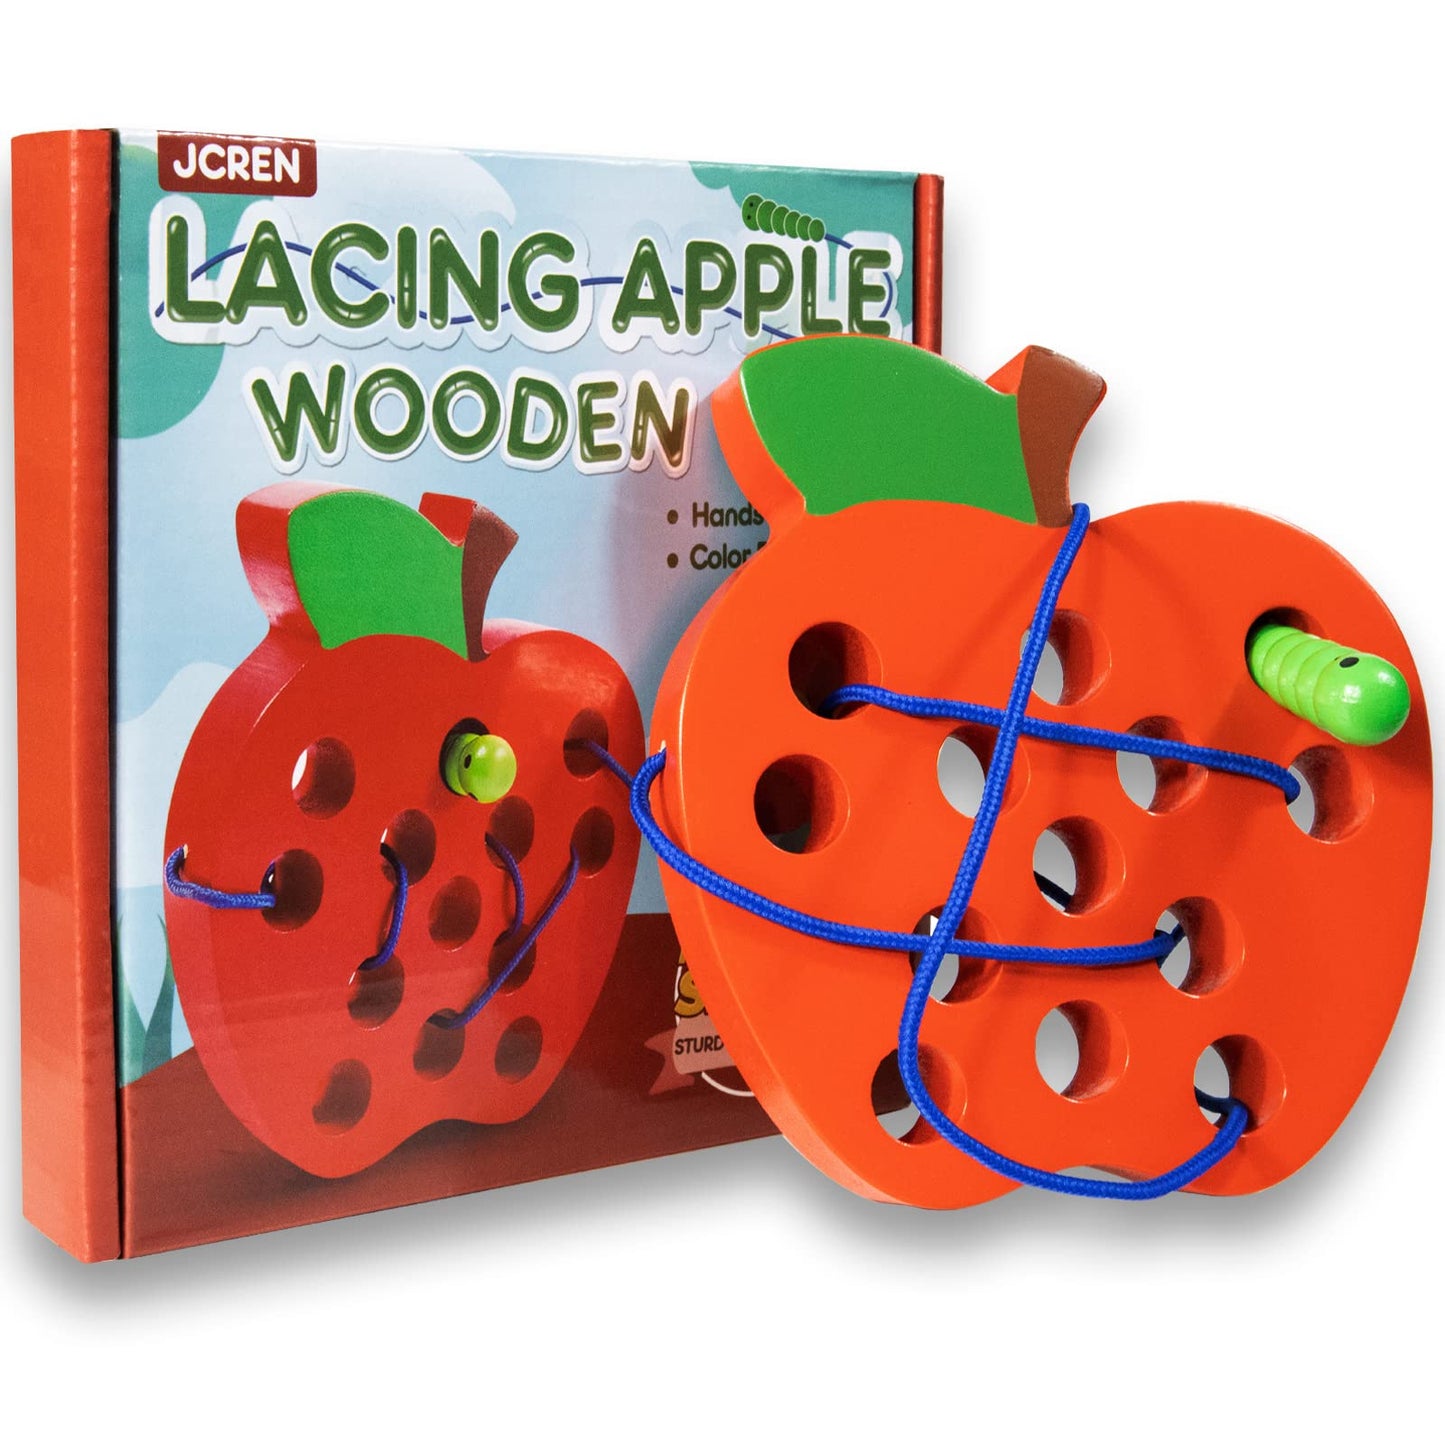 JCREN Wooden Lacing Apple Threading Toys Wood Lace Block Puzzle Shape Travel Game Toys Early Learning Fine Motor Skills Educational Gift for 3 4 5 Years Old Toddlers Baby Kids Boys